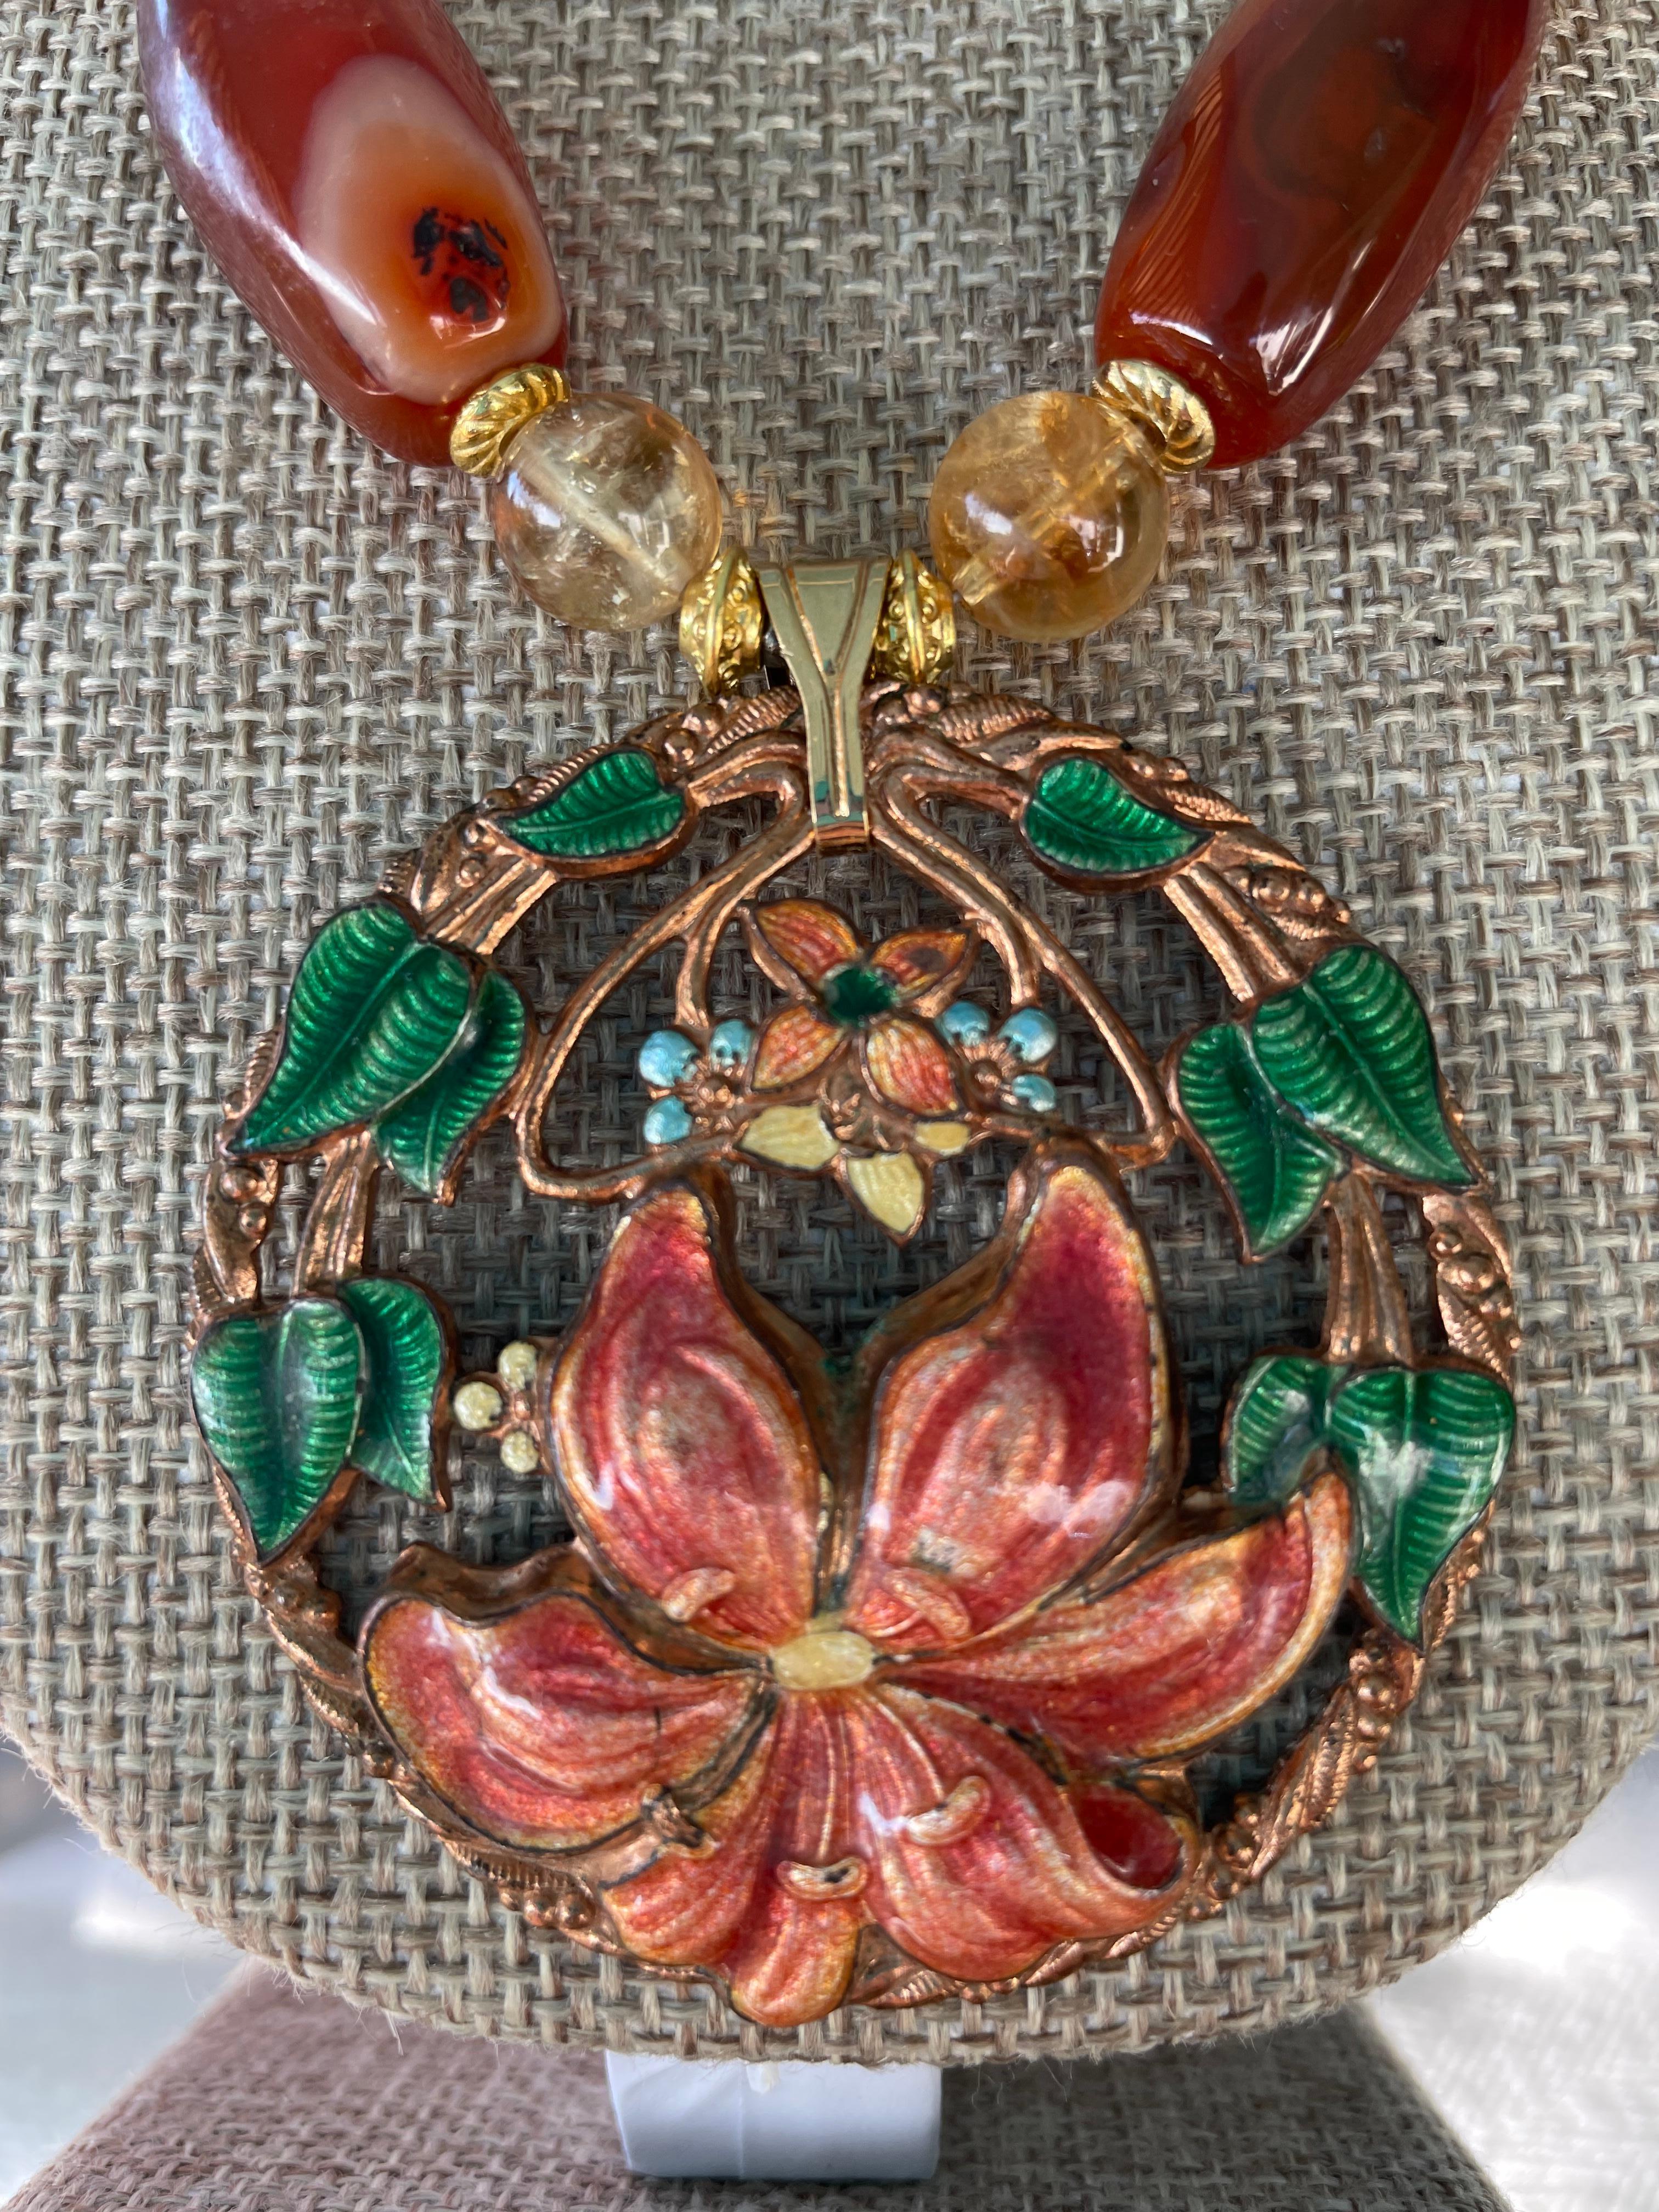 From Lorraine’s Bijoux an original one of a kind,handmade,statement necklace.
A vintage goldtone and enamel brooch is the centerpiece on a string of carnelian,Citrine and Venetian glass beads.This stunning piece would enhance any outfit.A goldtone